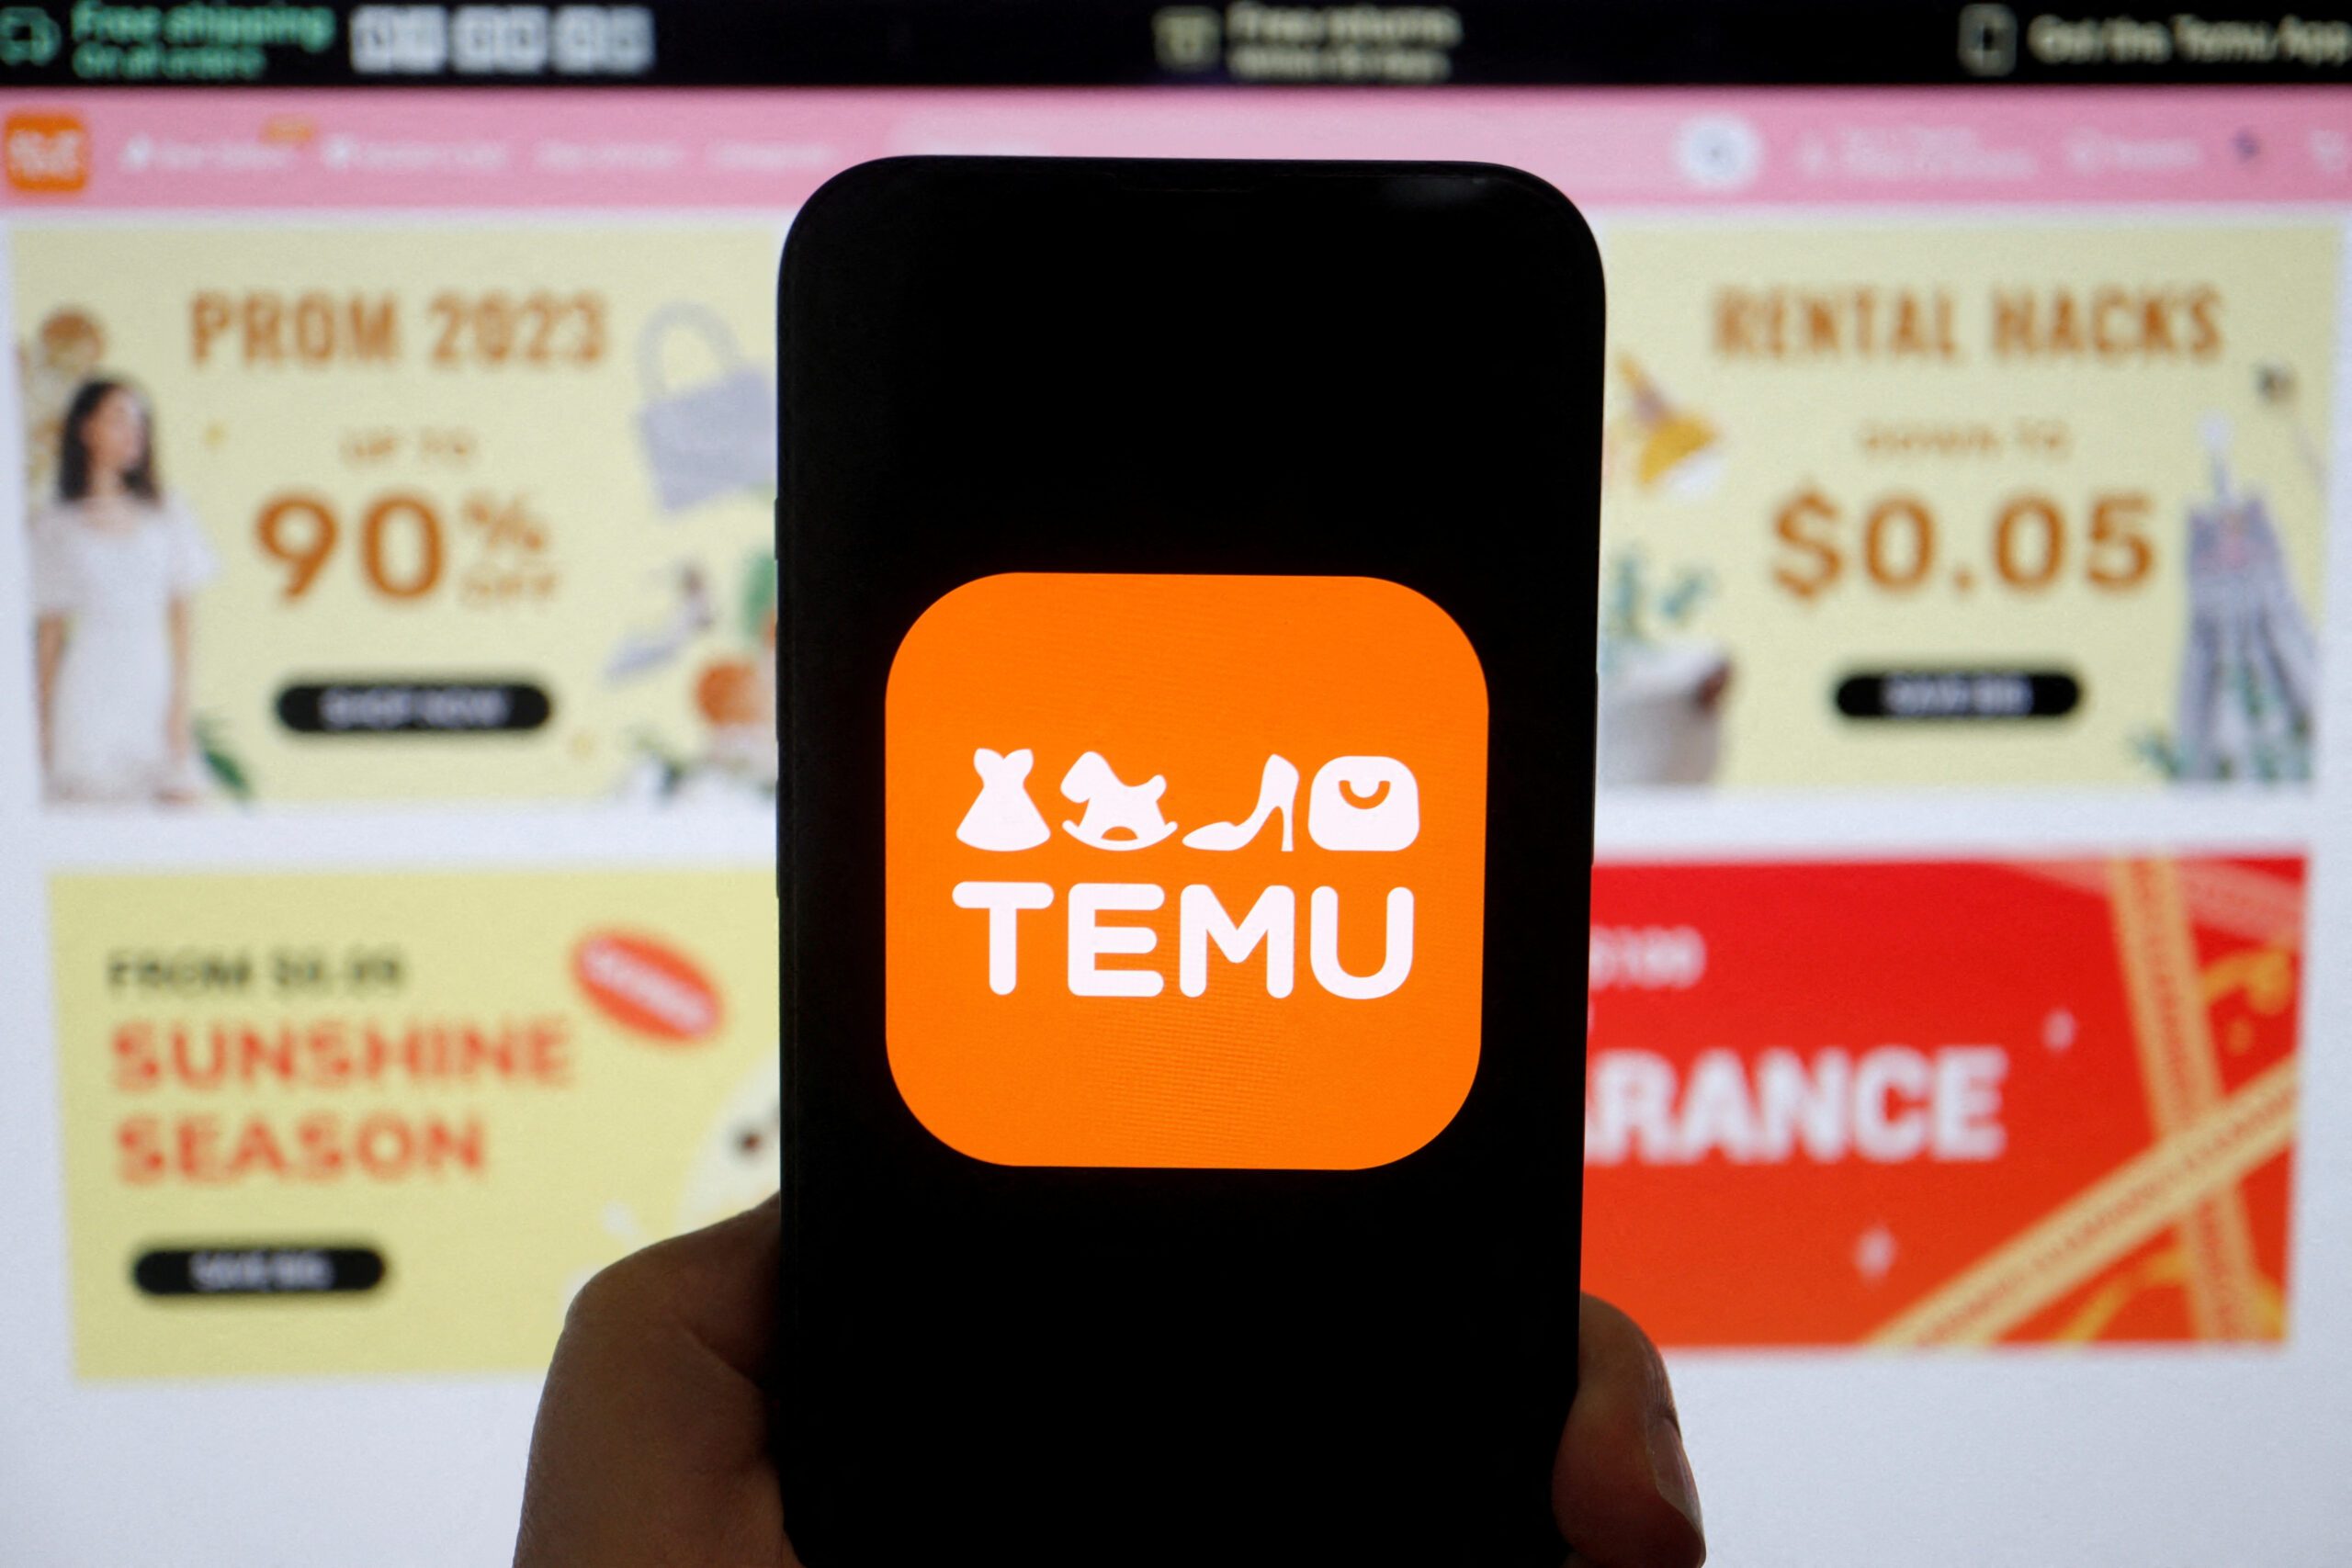 Chinese e-commerce platform Temu draws shoppers from US dollar stores